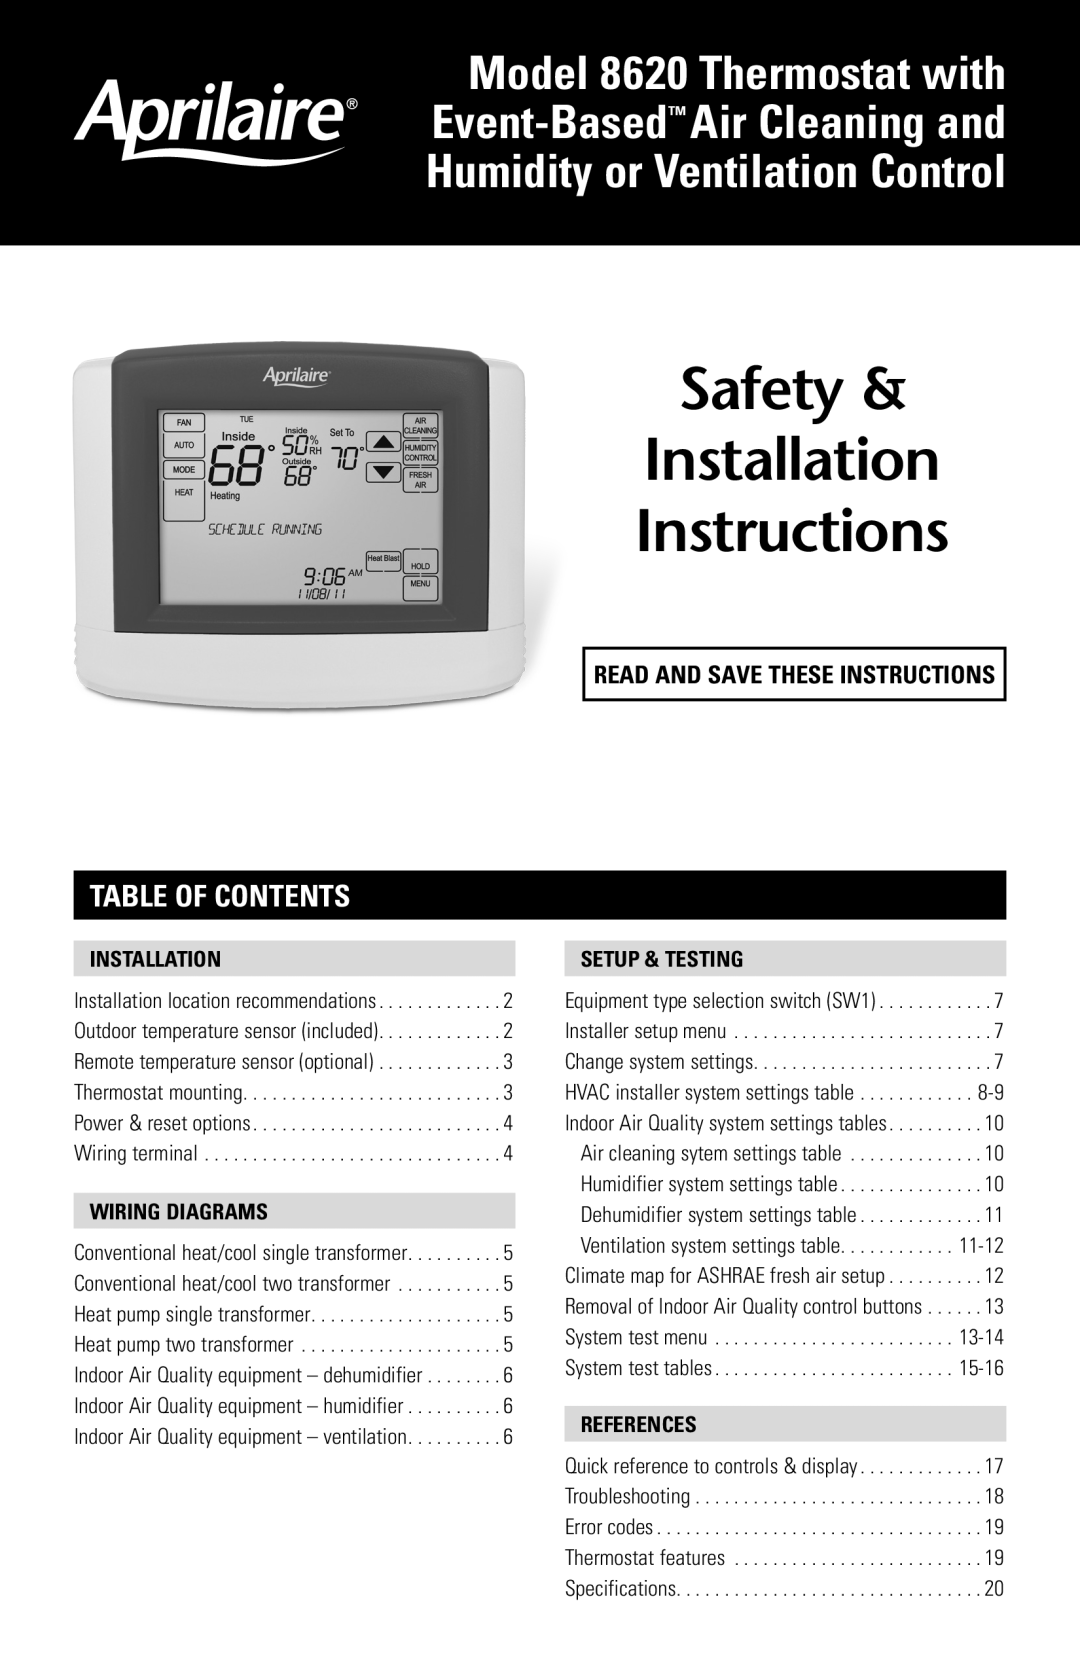 Aprilaire 8620 installation instructions Table of contents, Installation, Setup & Testing, Wiring Diagrams, References 